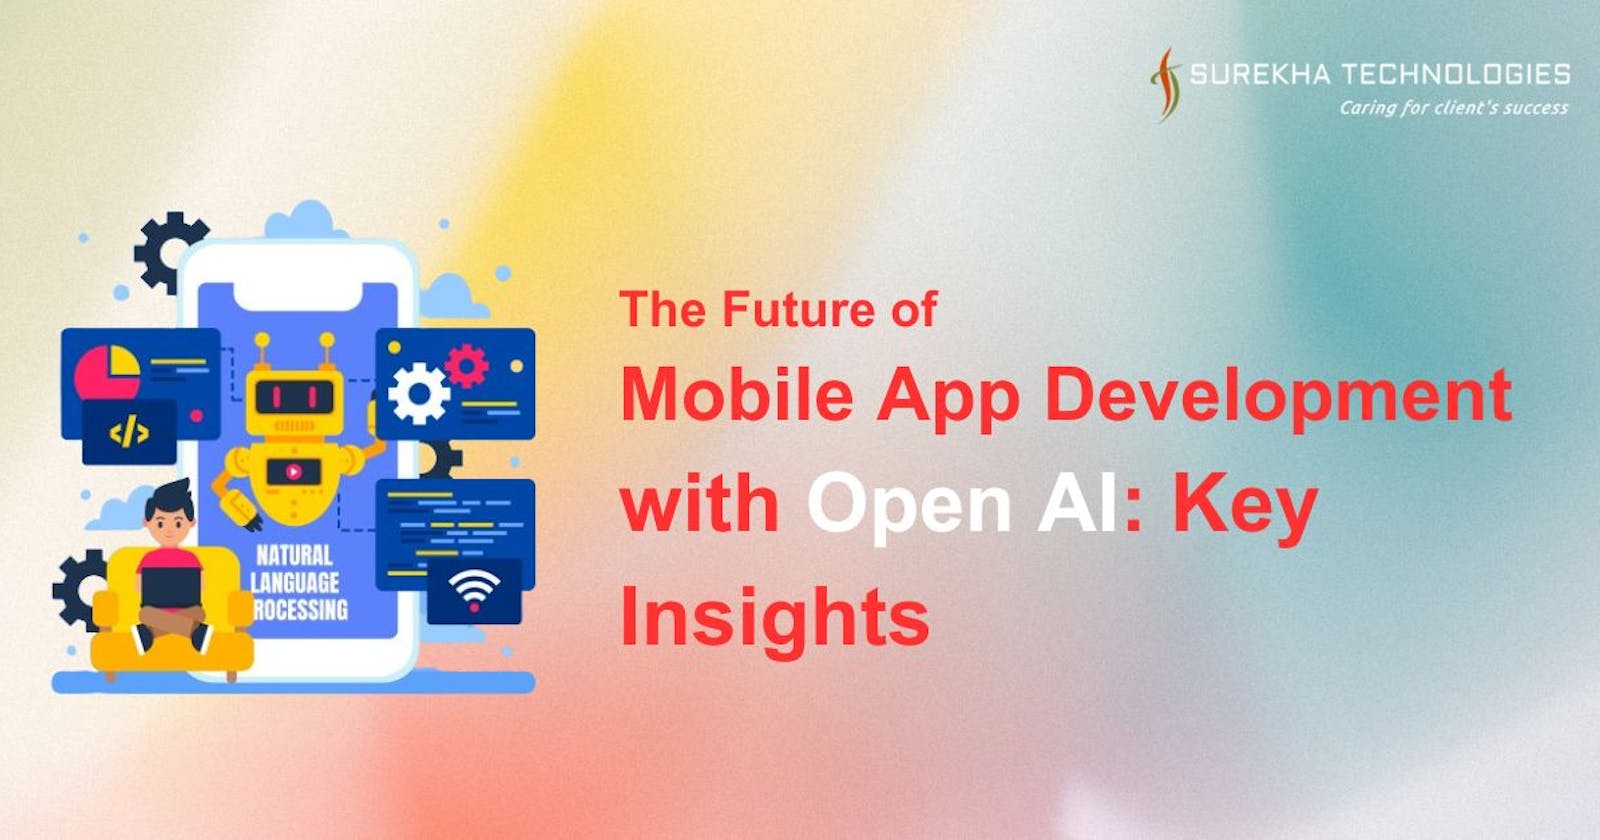 The Future of Mobile App Development with Open AI: Key Insights